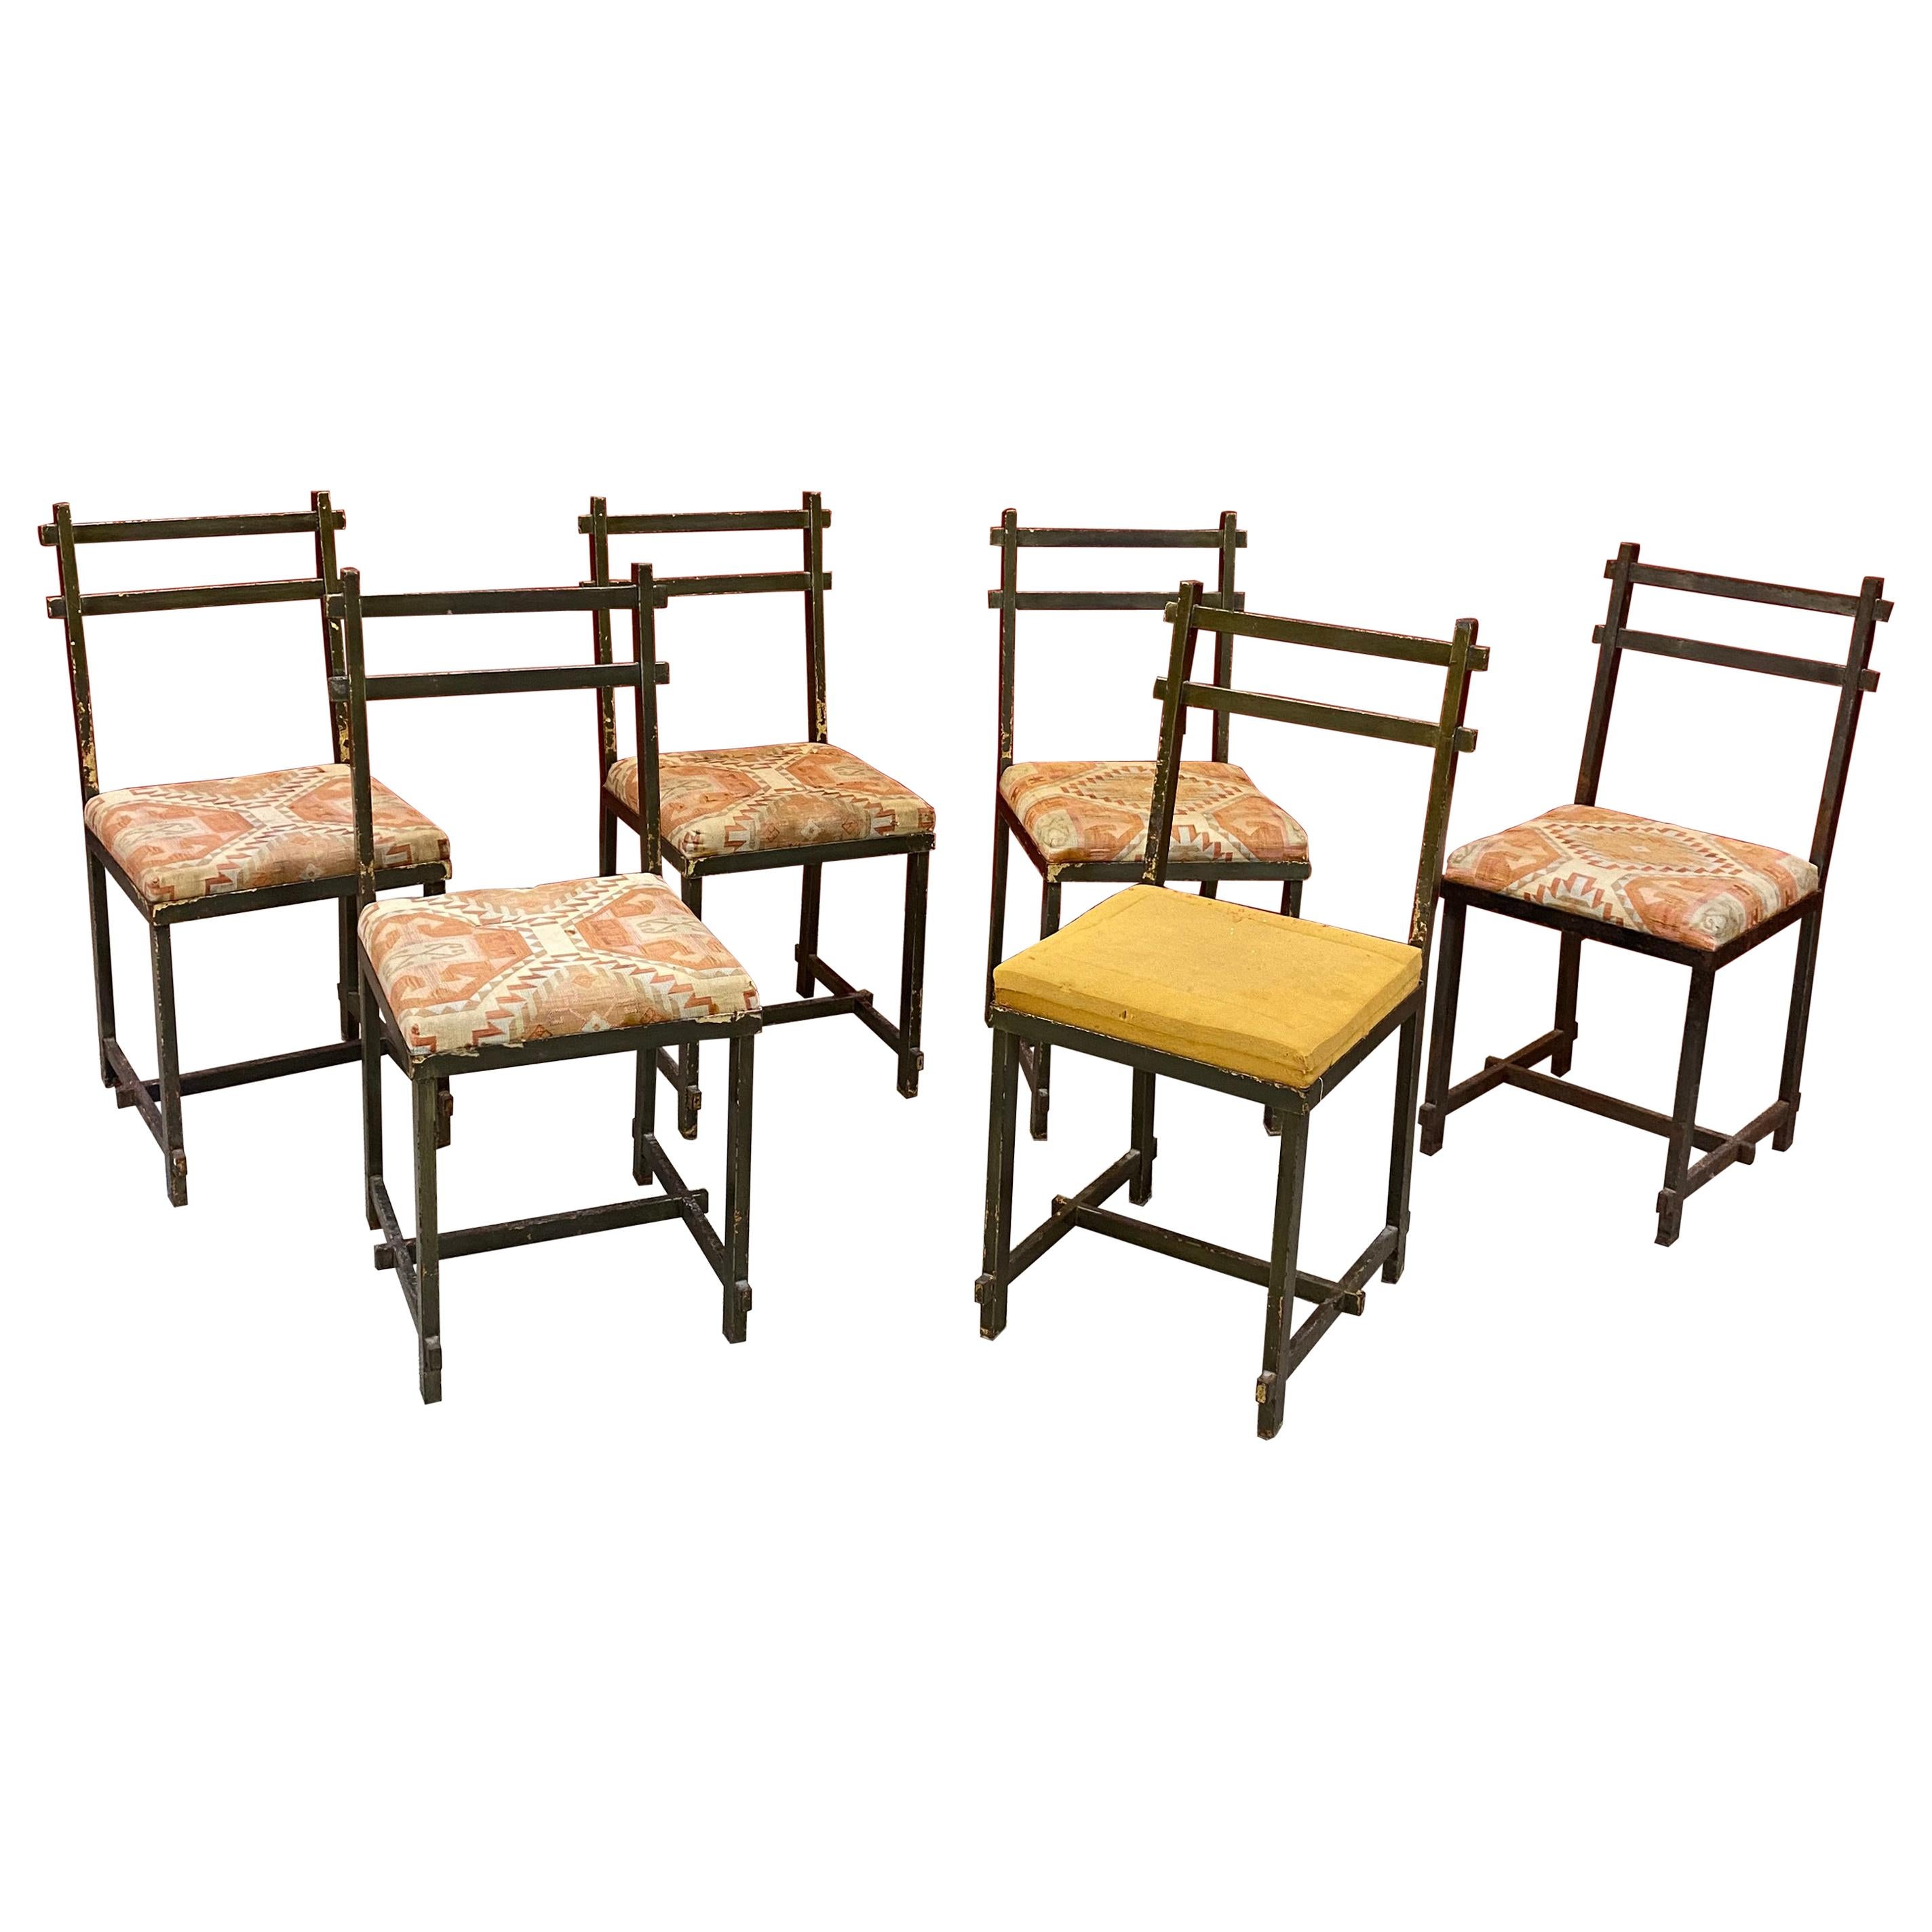 Original Chairs in Lacquered Metal, in the Style of Jacques Adnet circa 1940/195